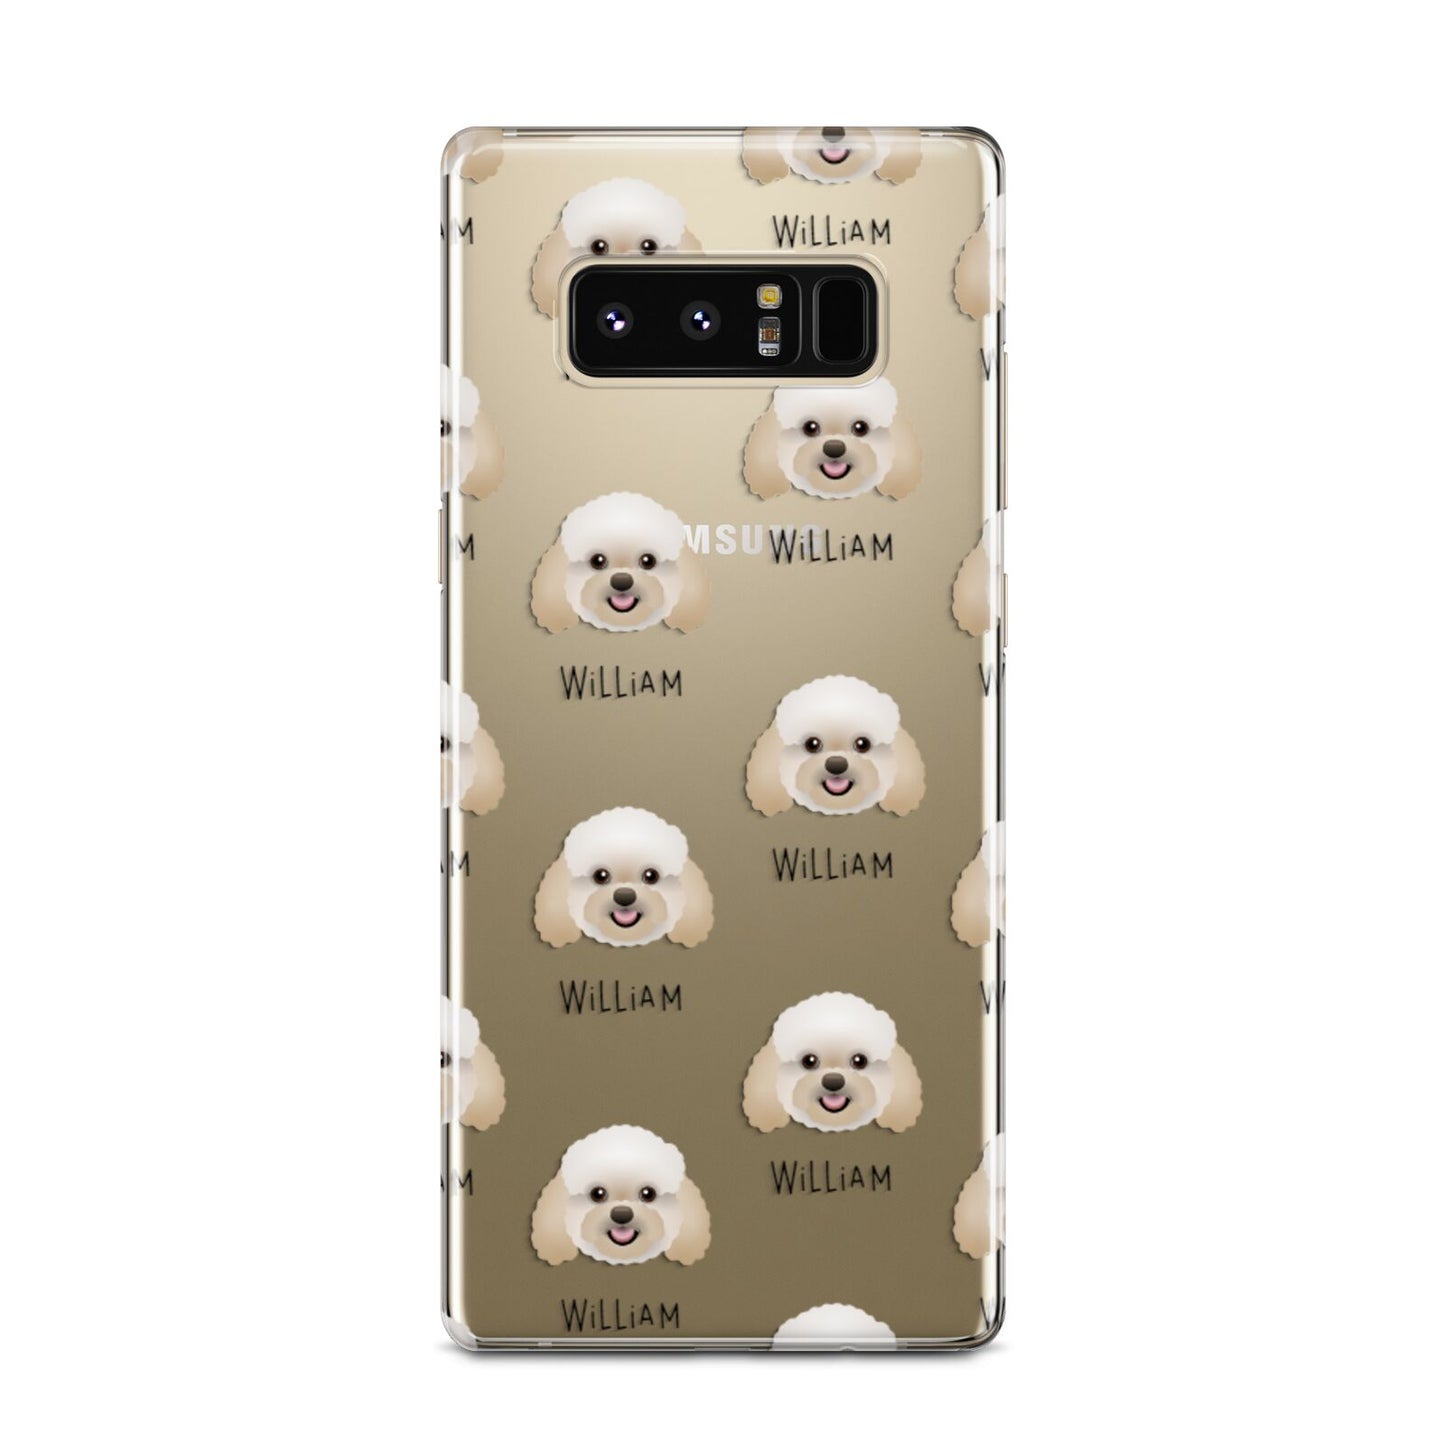 Bich poo Icon with Name Samsung Galaxy Note 8 Case